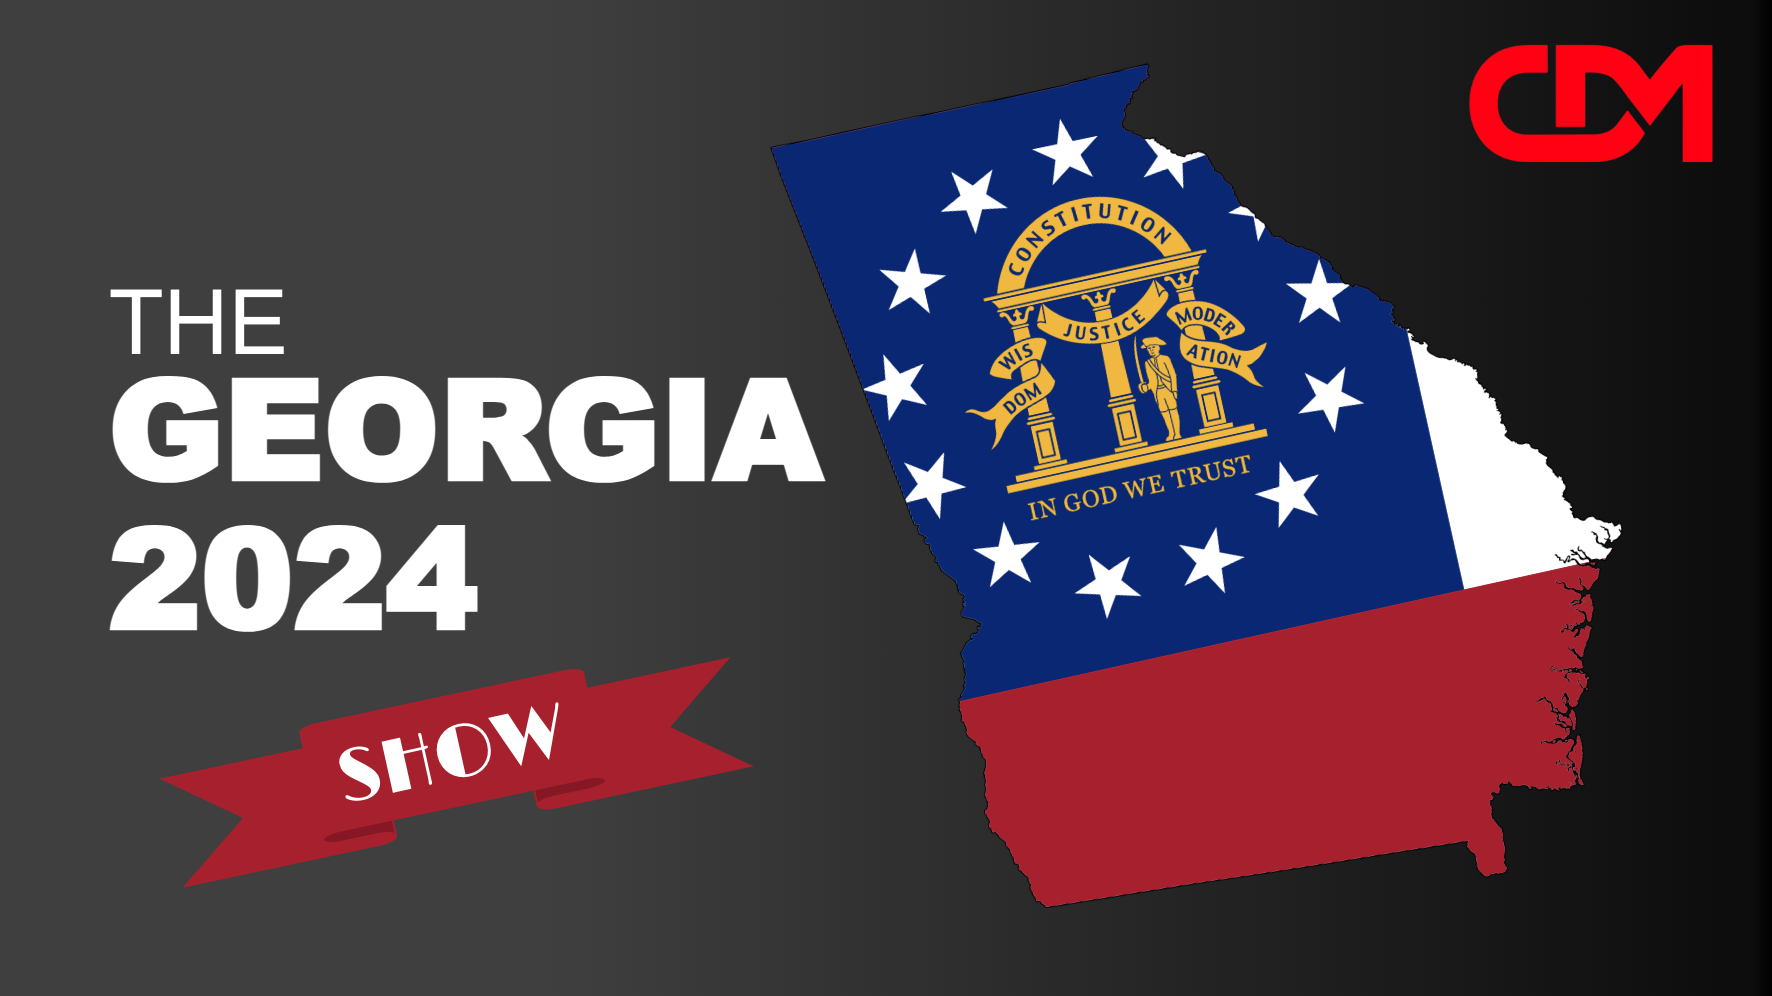 LIVE EMERGENCY BROADCAST 12pm EST: The Georgia 2024 Show! Join Us To Learn How To Impact The Fight For A MAGA Speaker!